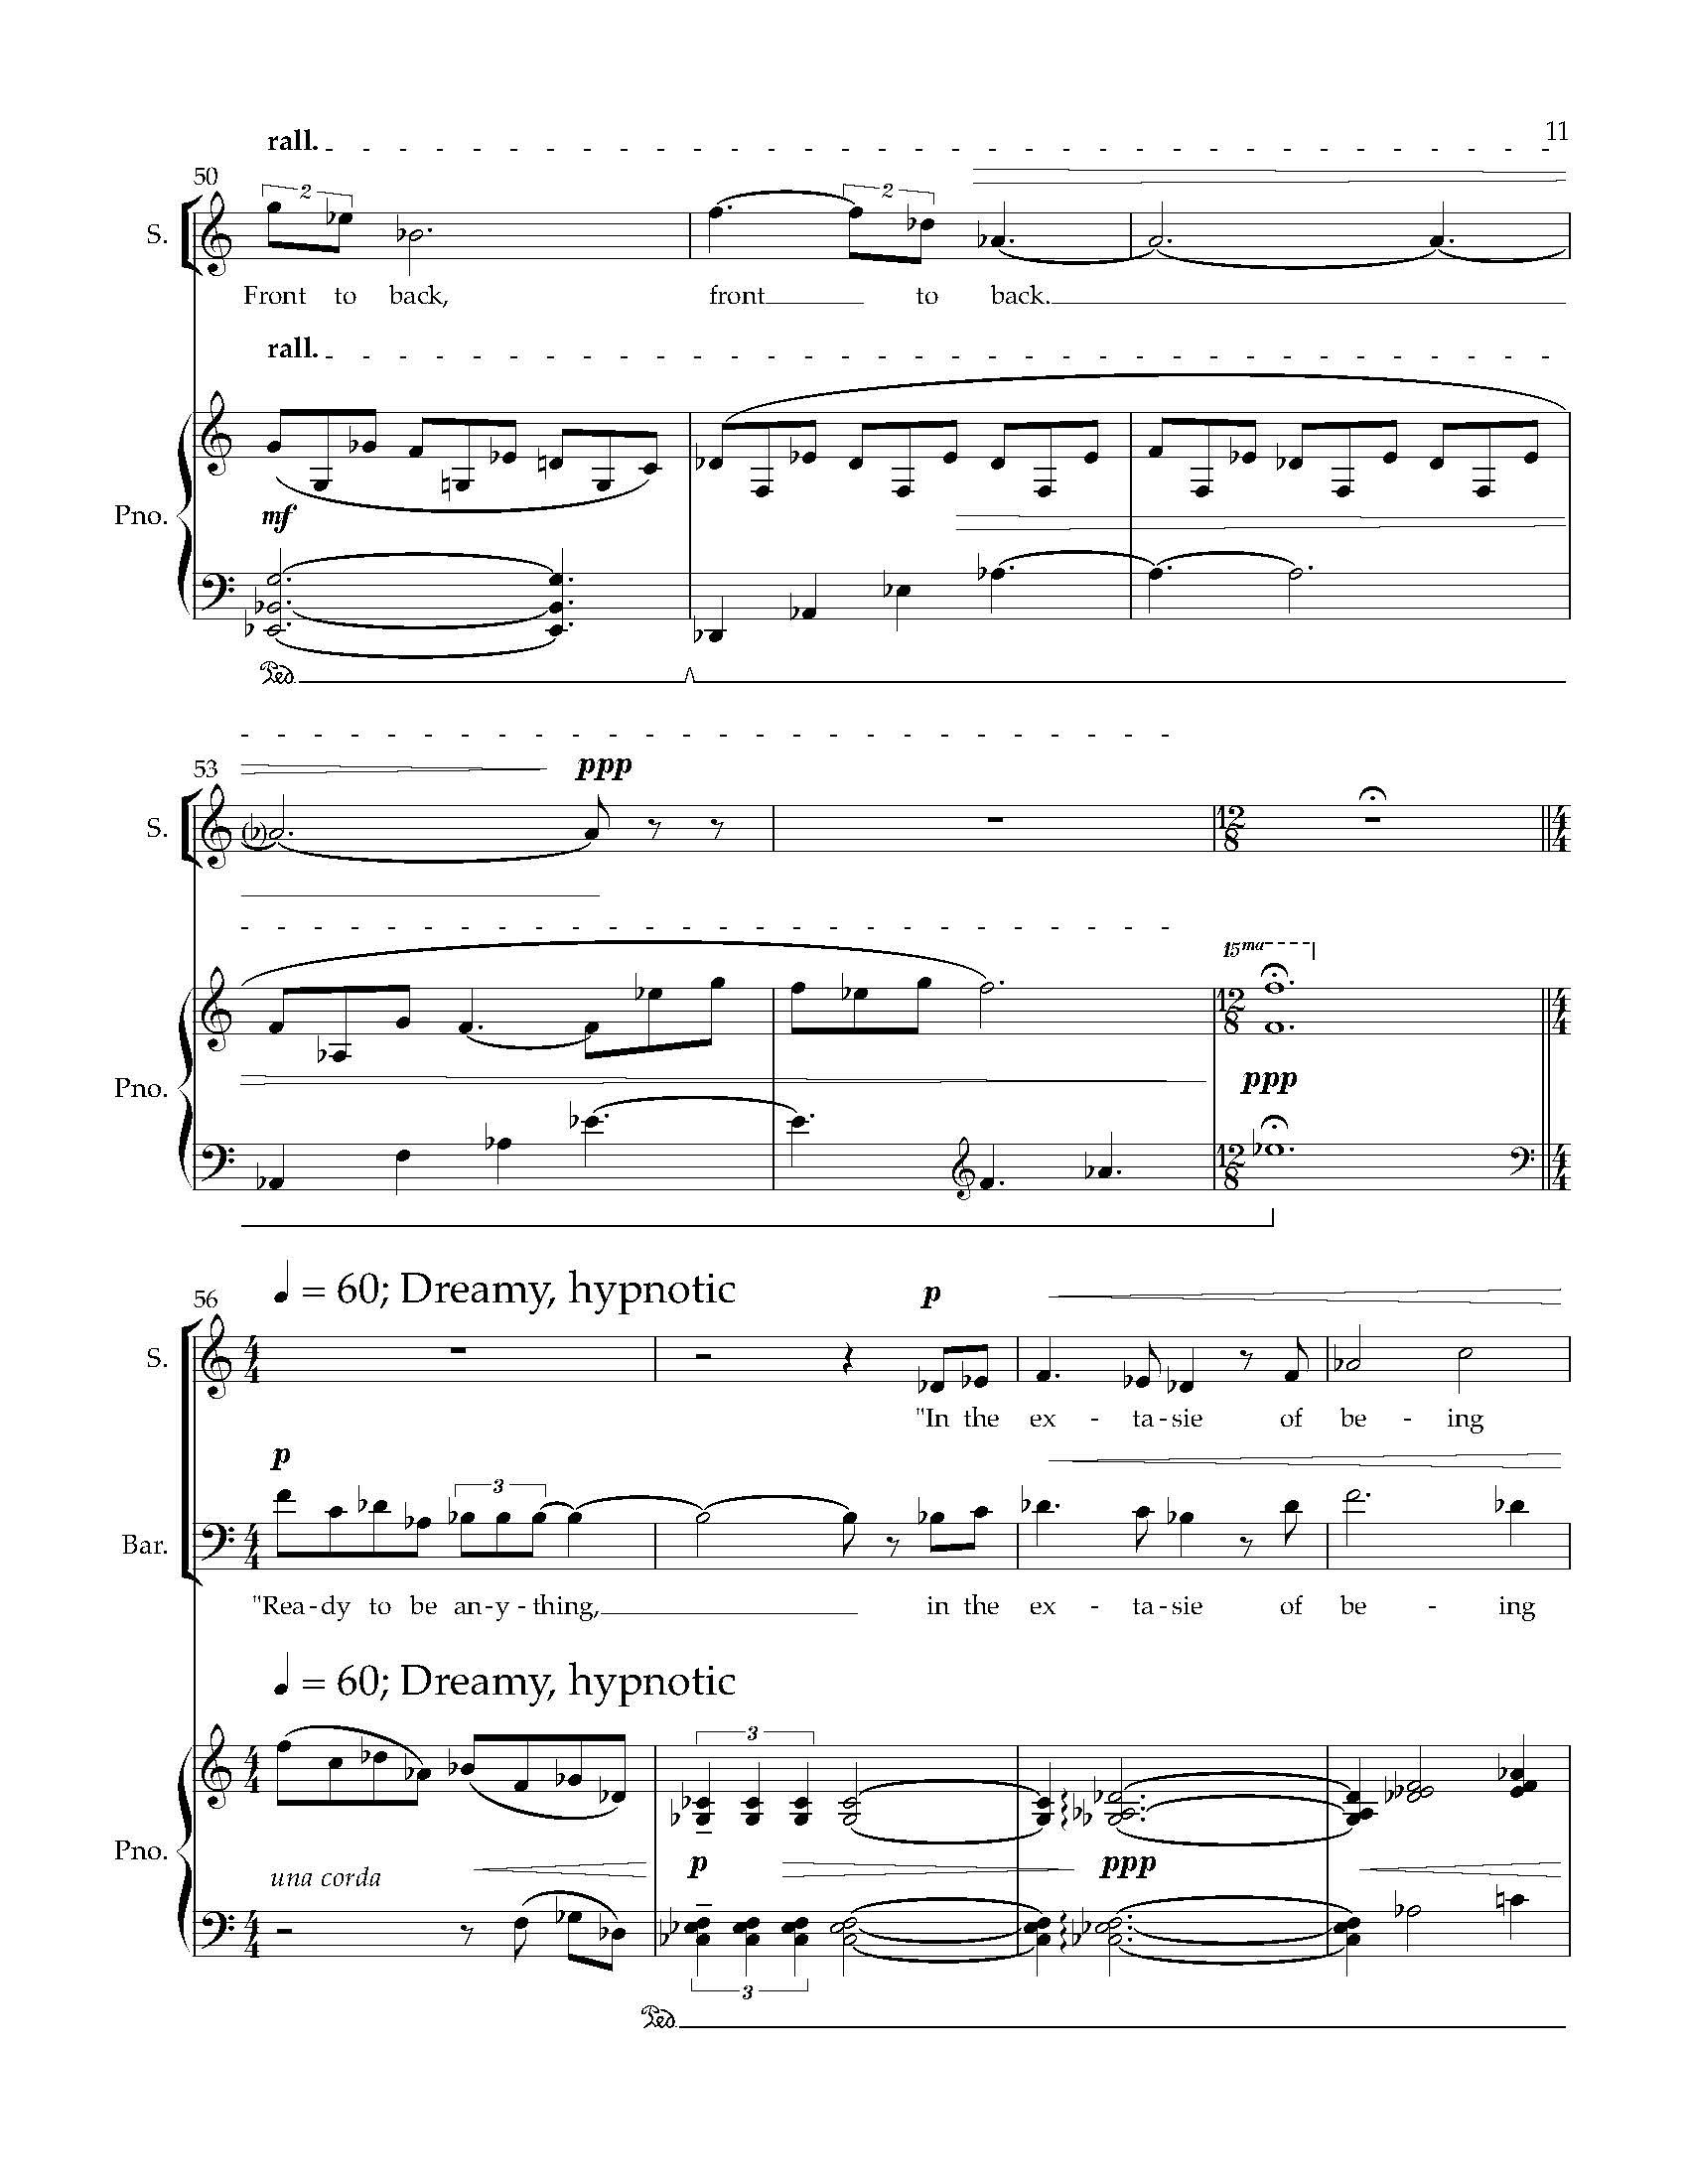 Sky - Complete Score (Revised)_Page_17.jpg